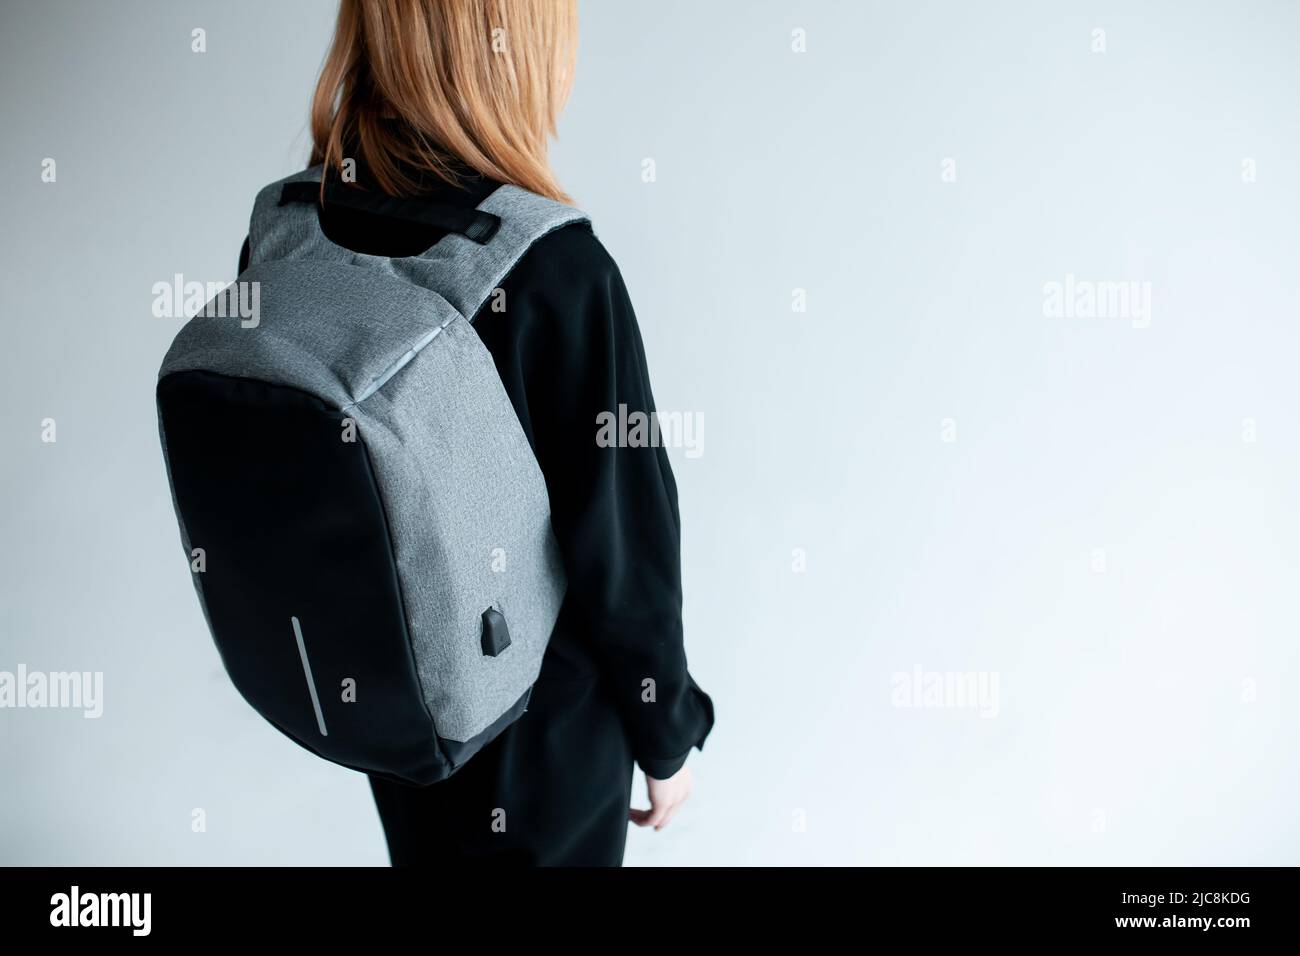 stylish hipster person holding modern backpack bag on white background Stock Photo